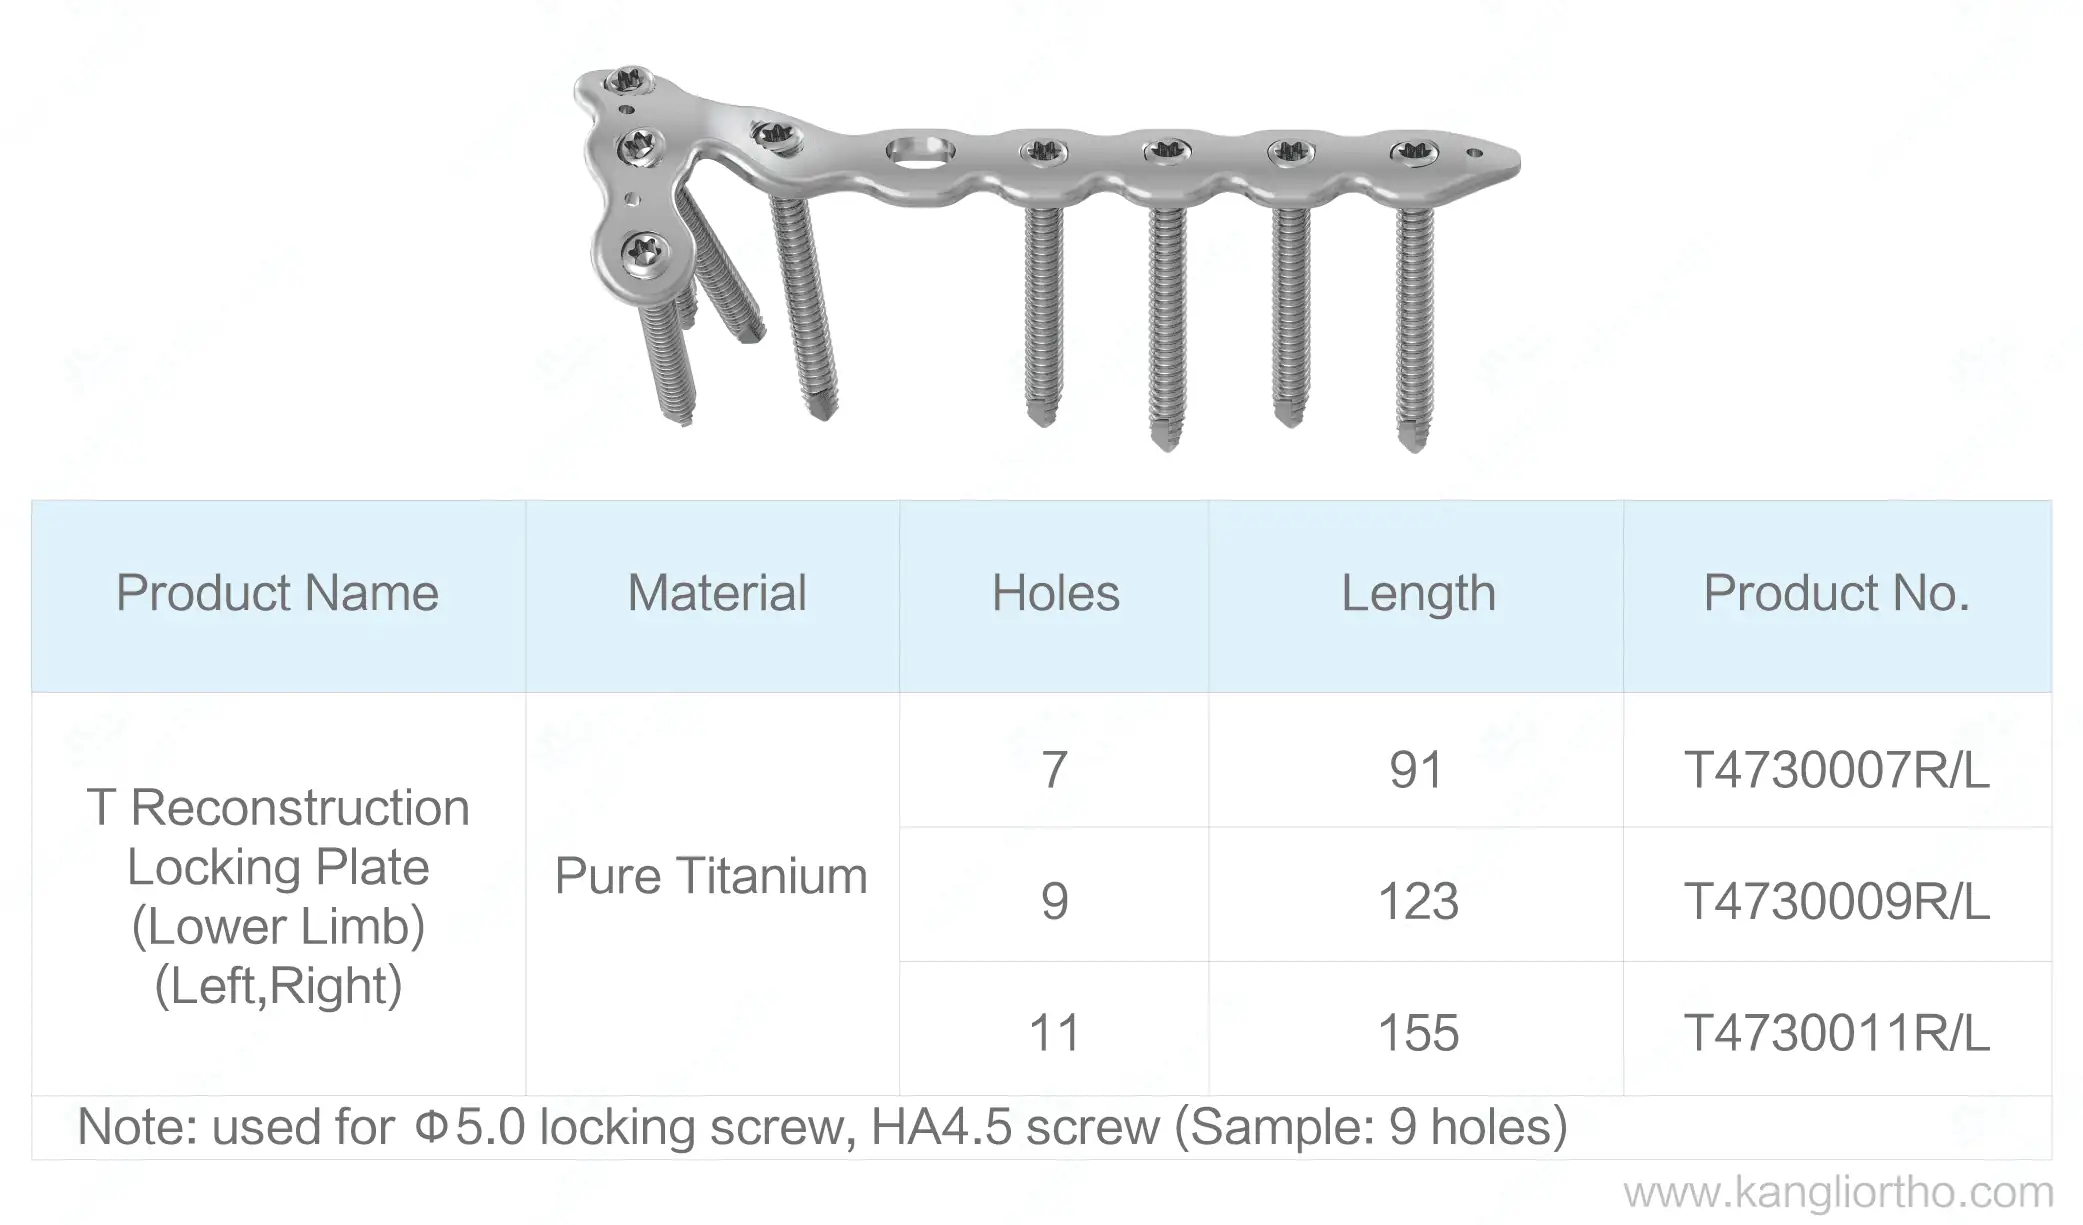 t-reconstruction-locking-plate-low-limb-specifications